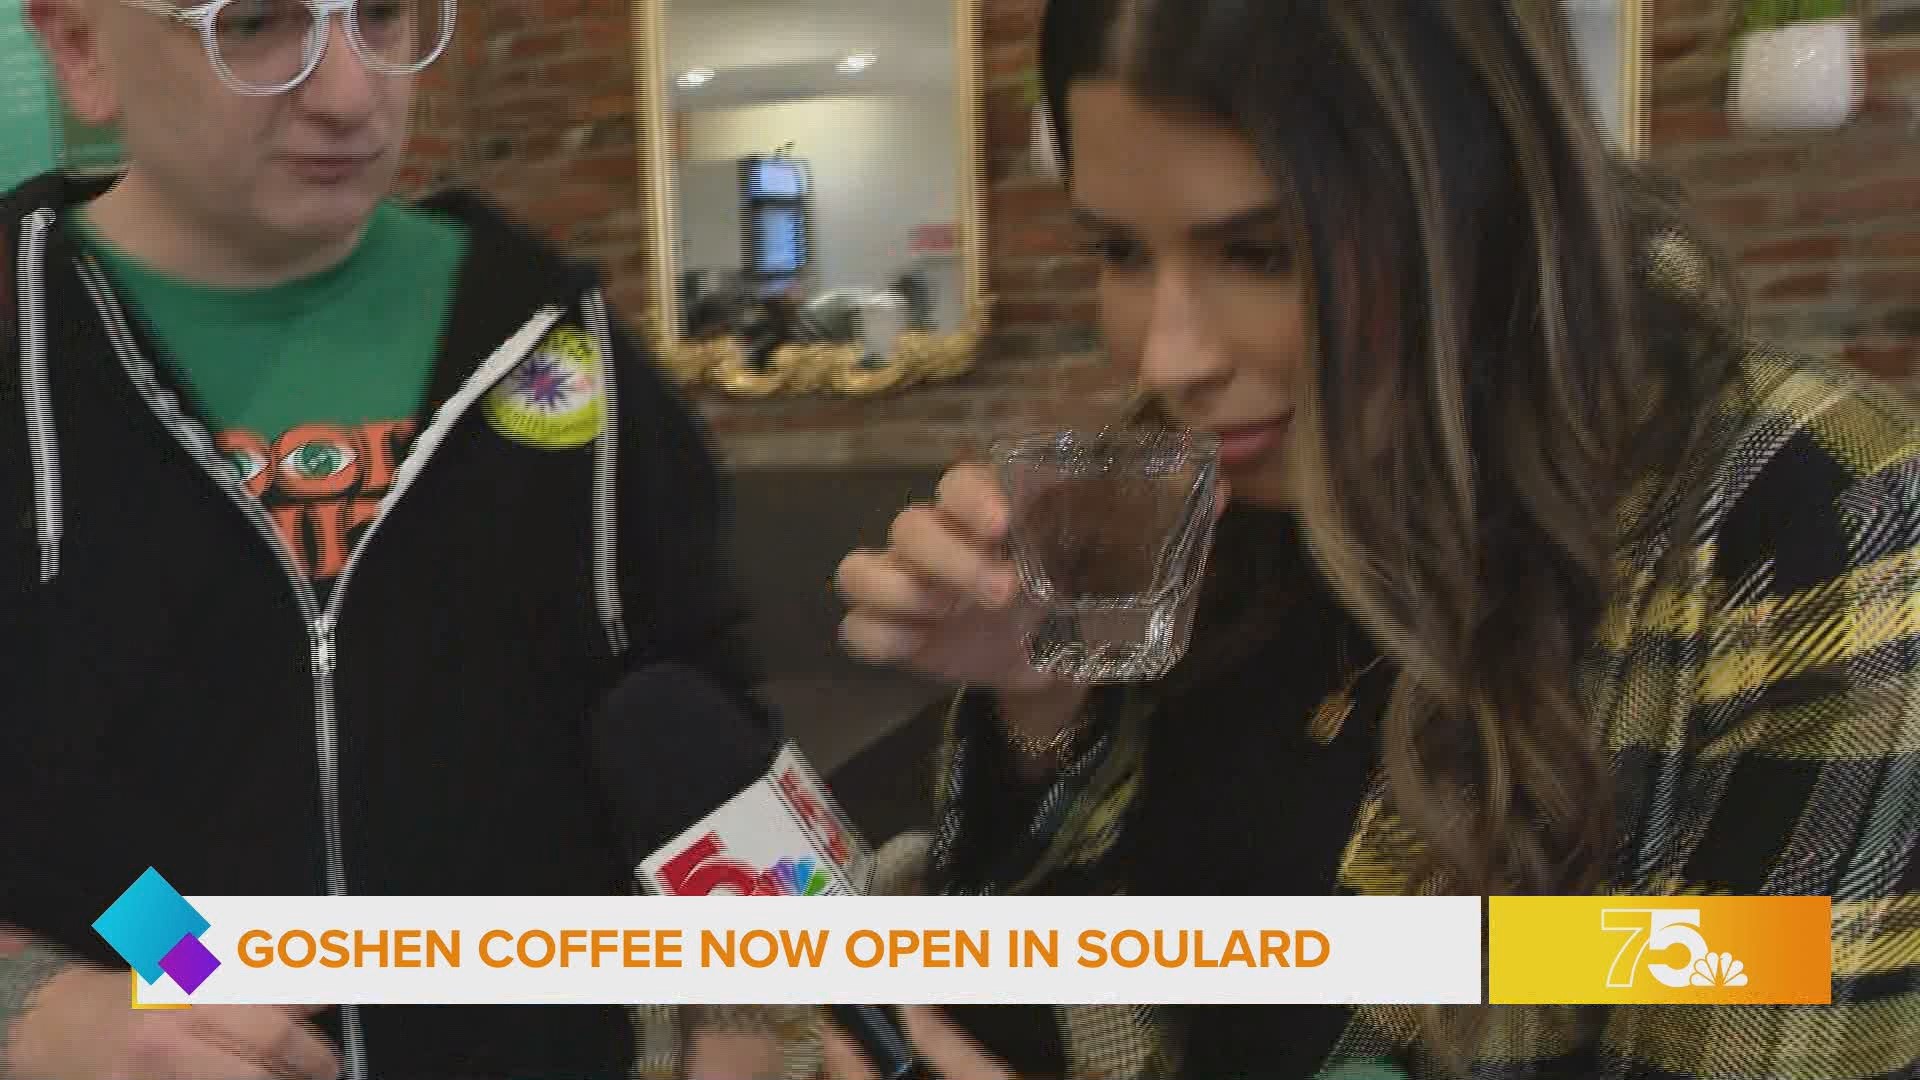 It's an exciting day for coffee lovers! Especially if you're a fan of Goshen Coffee. The company is opening another cafe in Soulard with some unique menu items.